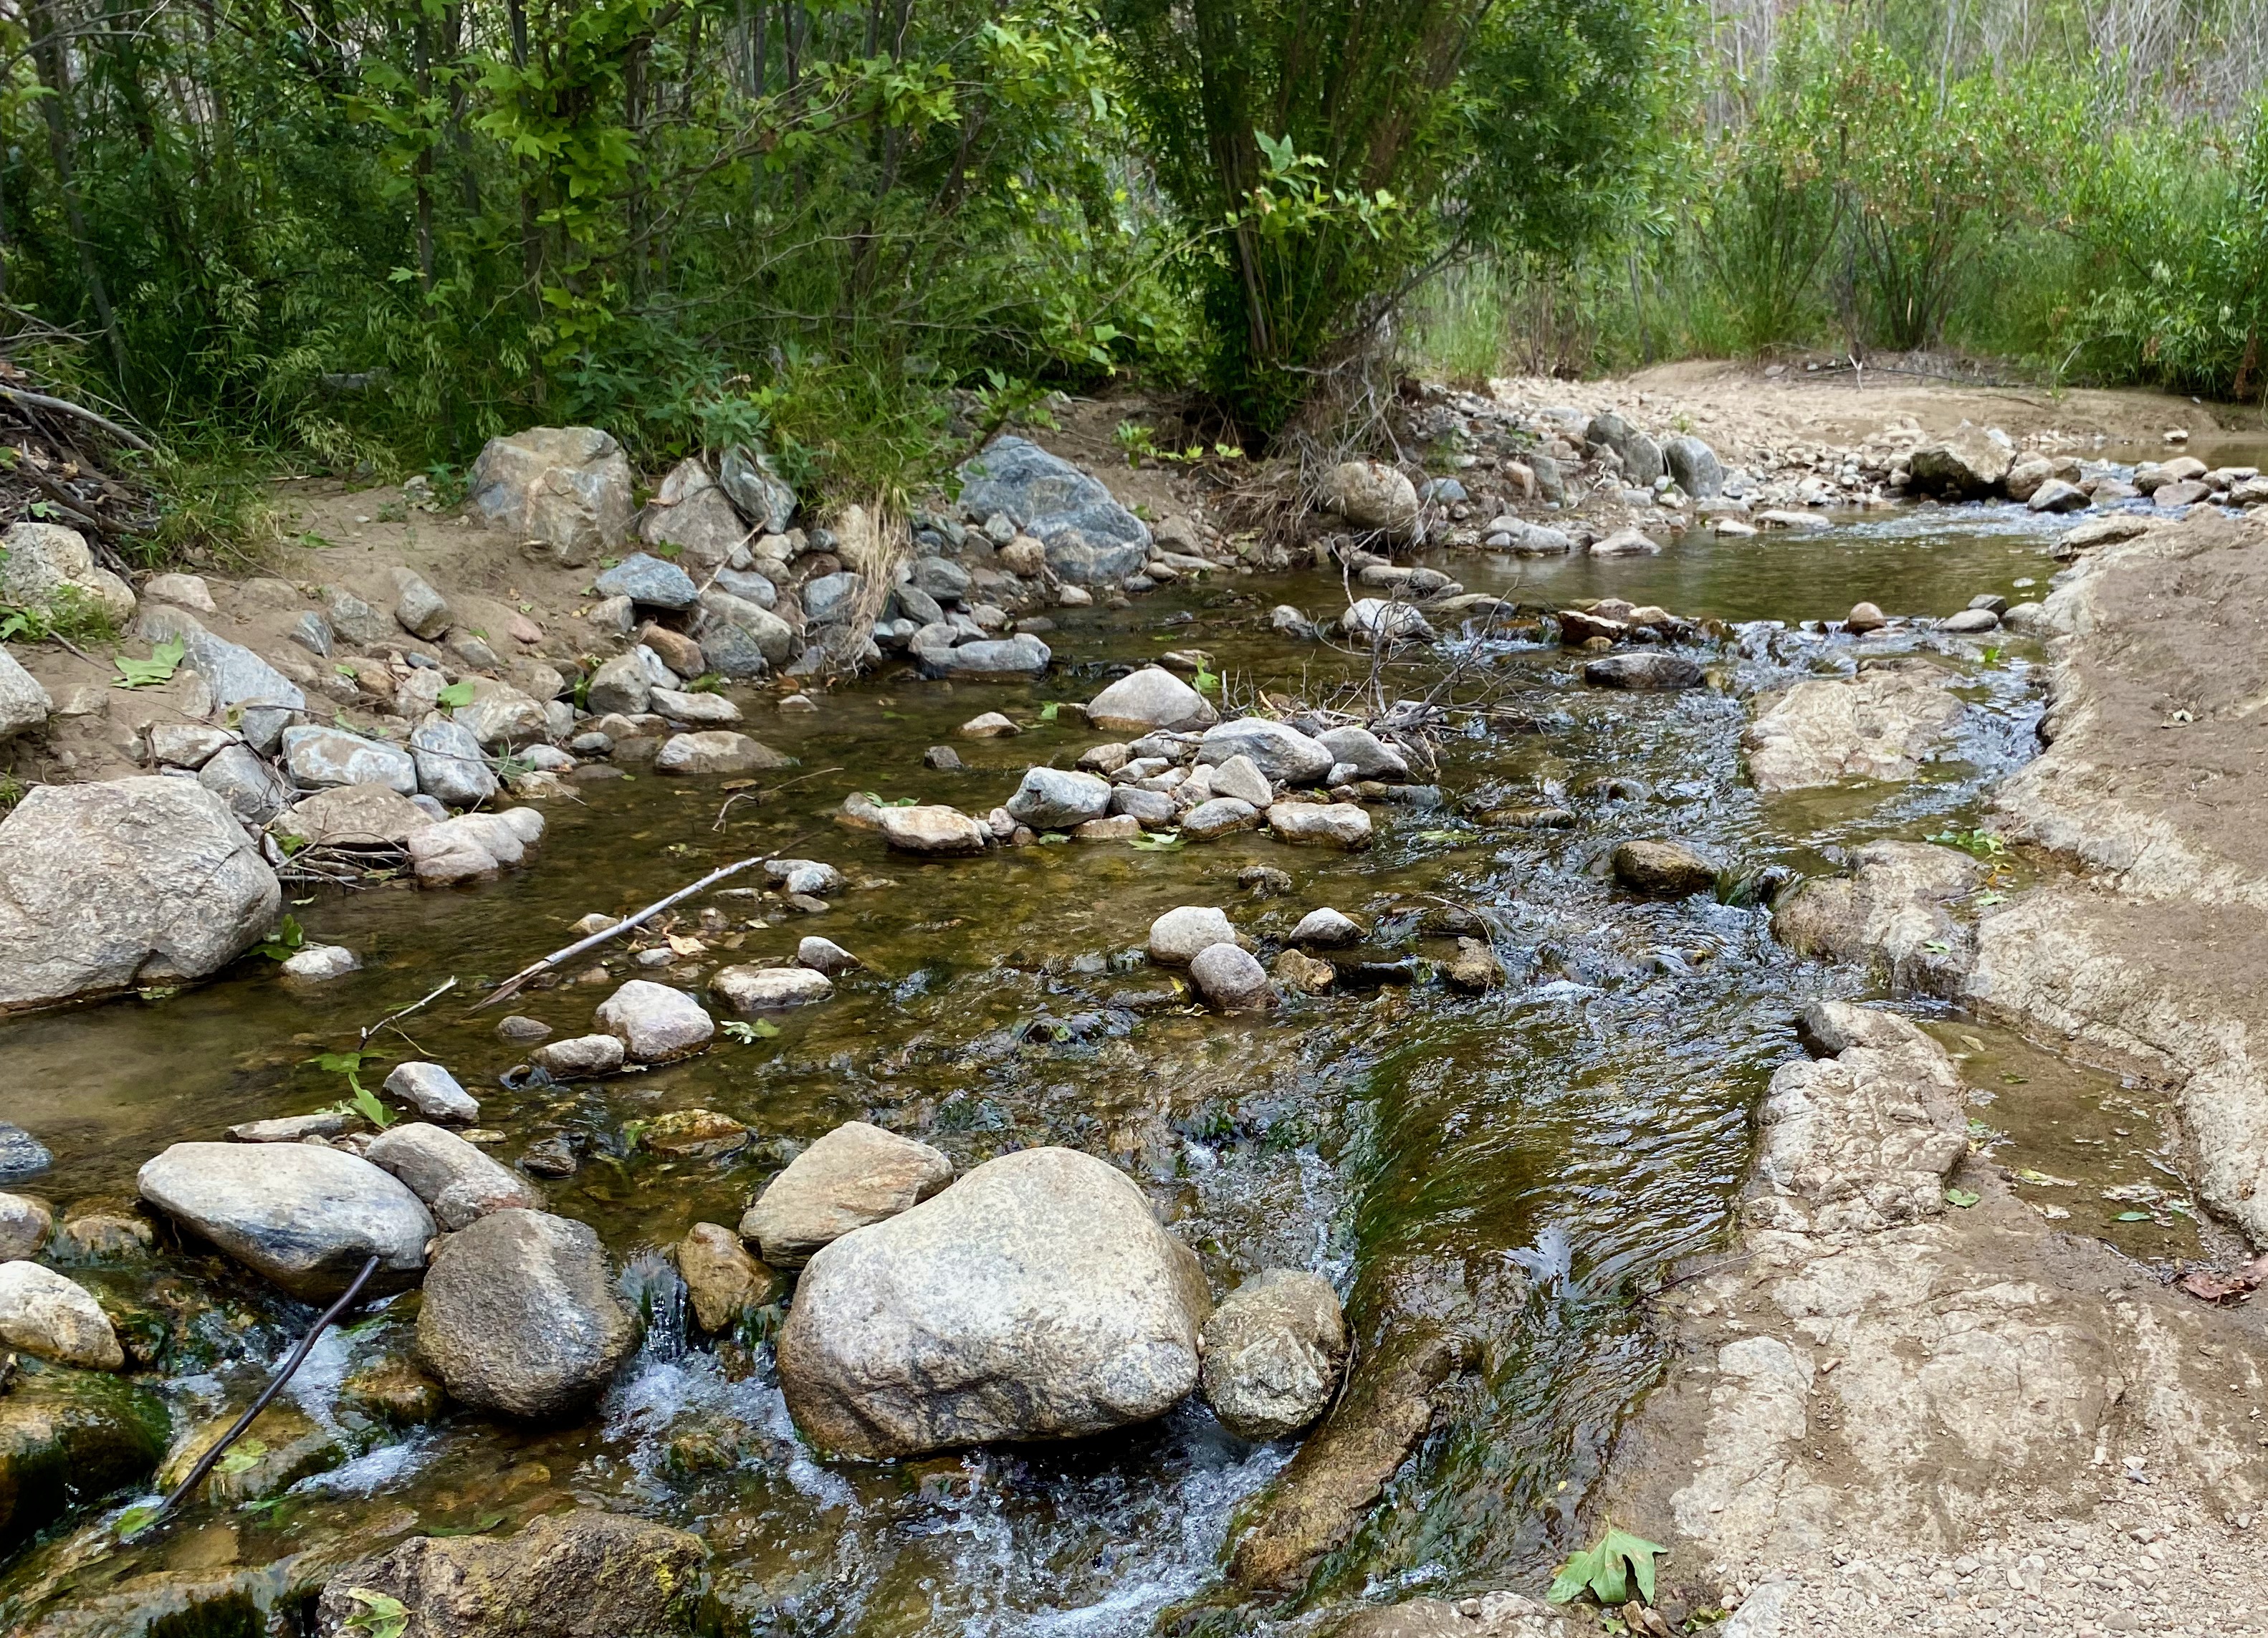 Creek bed at Placerita Canyon in Newhall, CA.